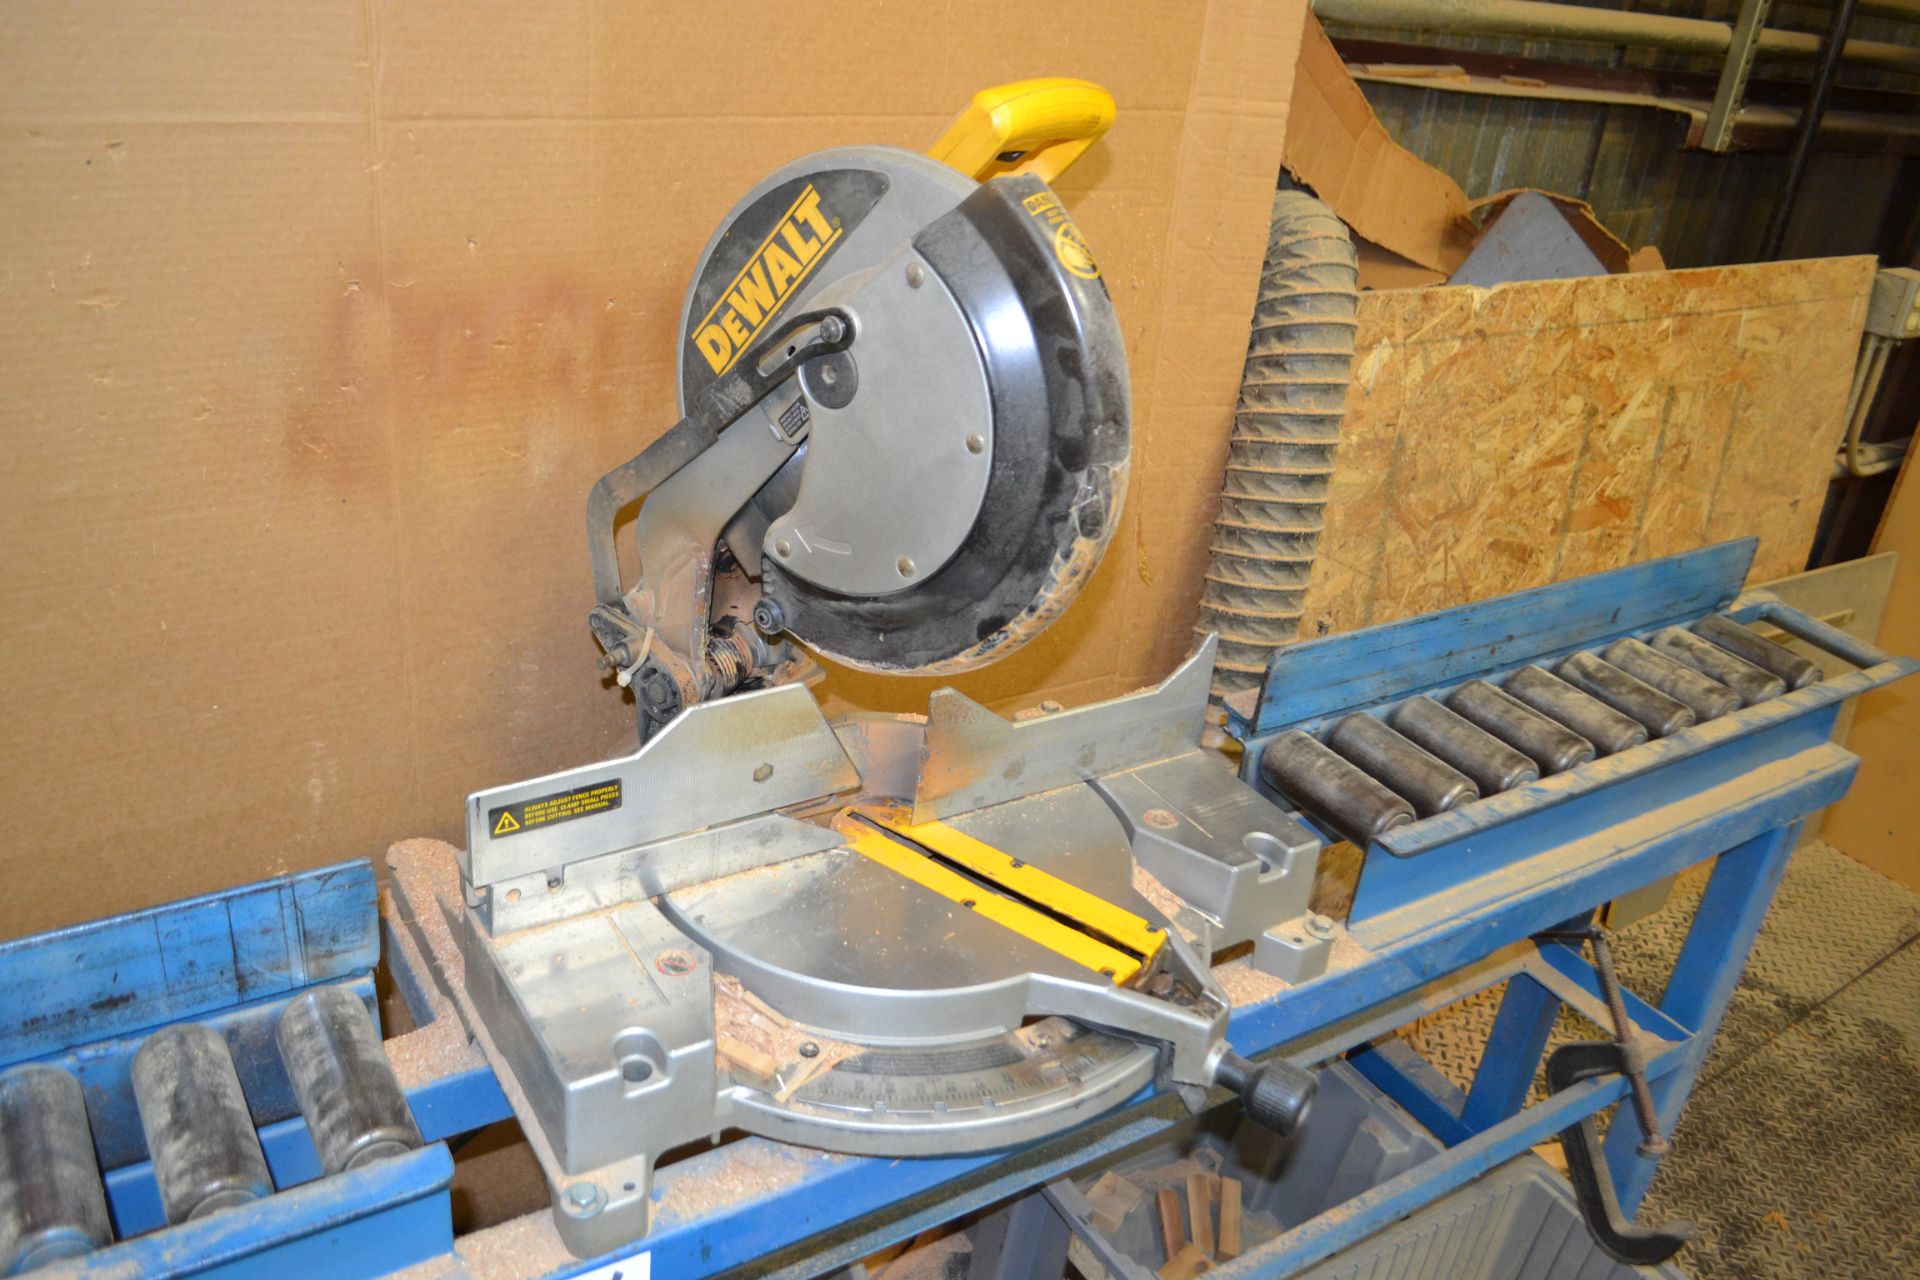 DeWalt DW705 Type 8 12" Compound Miter Saw mounted on 111" x 6" Roller Table - Image 2 of 2